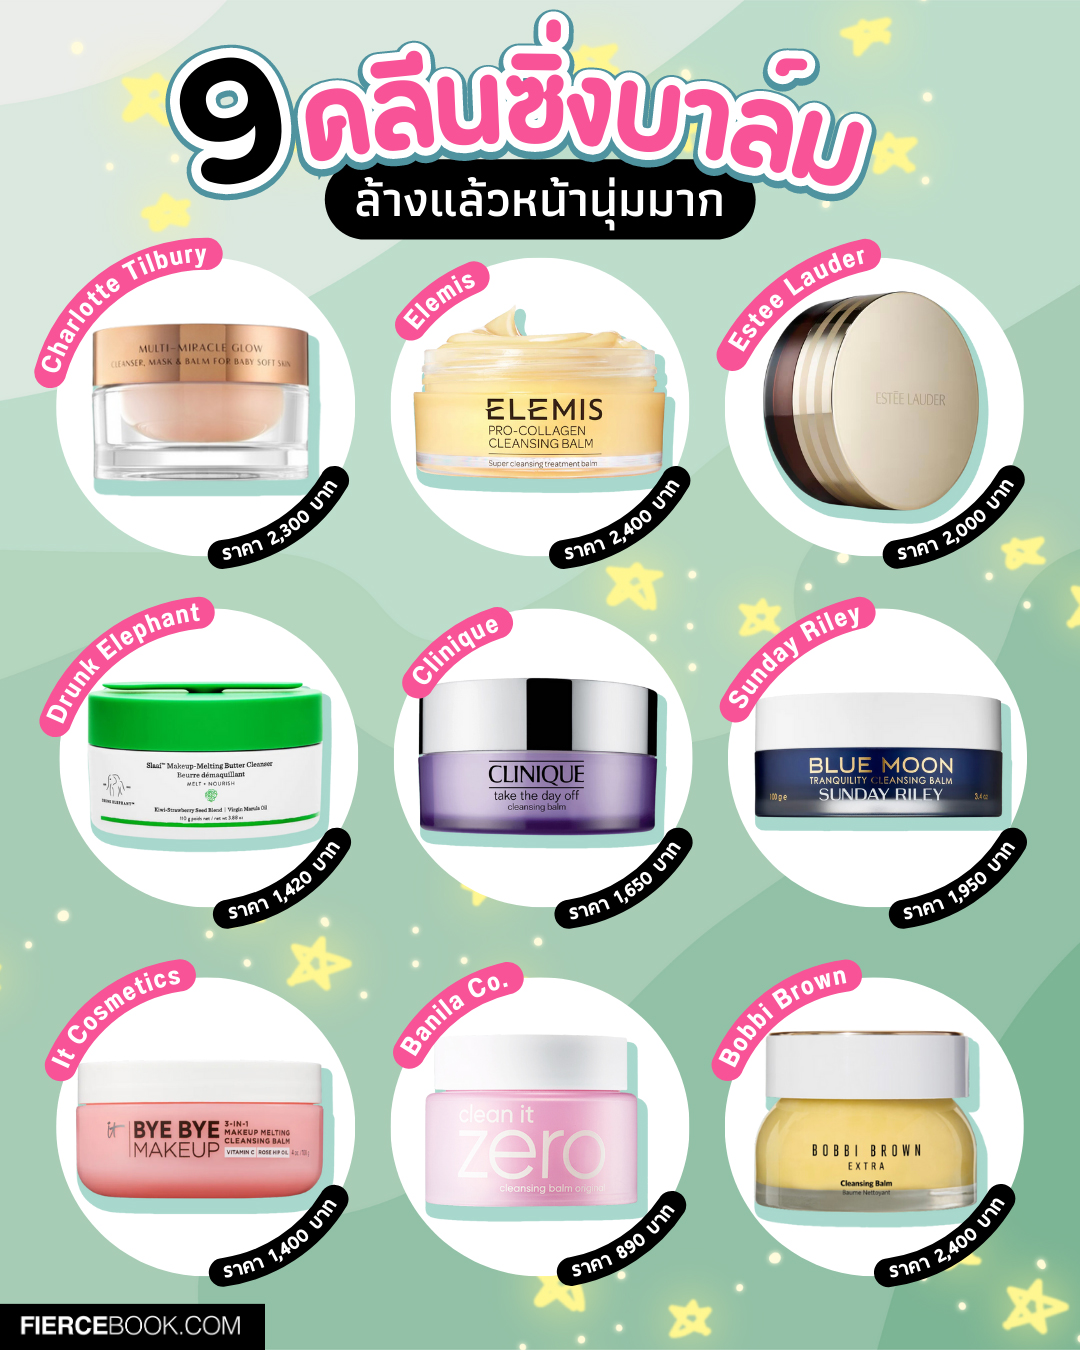 Beauty Items, คลีนซิ่งบาล์ม, ผลิตภัณฑ์, ล้างเมคอัพ, ล้างเครื่องสำอาง, เนื้อบาล์ม, แบบบาล์ม, ลบเมคอัพ, ลบเครื่องสำอาง, ผิวนุ่ม, ไม่แห้งตึง, ผิวชุ่มชื้น, Estee Lauder Advanced Night Cleansing Balm with Lipid Rich Oil Infusion, Bobbi Brown Extra Cleansing Balm, Elemis Pro-Collagen Cleansing Balm, Clinique Take The Day Off Cleansing Balm, Charlotte Tilbury Multi Miracle Glow, It Cosmetics Bye Bye Makeup 3-In-1 Makeup Melting Cleansing Balm, Drunk Elephant Slaai Makeup-Melting Butter Cleanser, Banila Co. Clean It Zero Cleansing Balm, Sunday Riley Blue Moon Tranquility Cleansing Balm